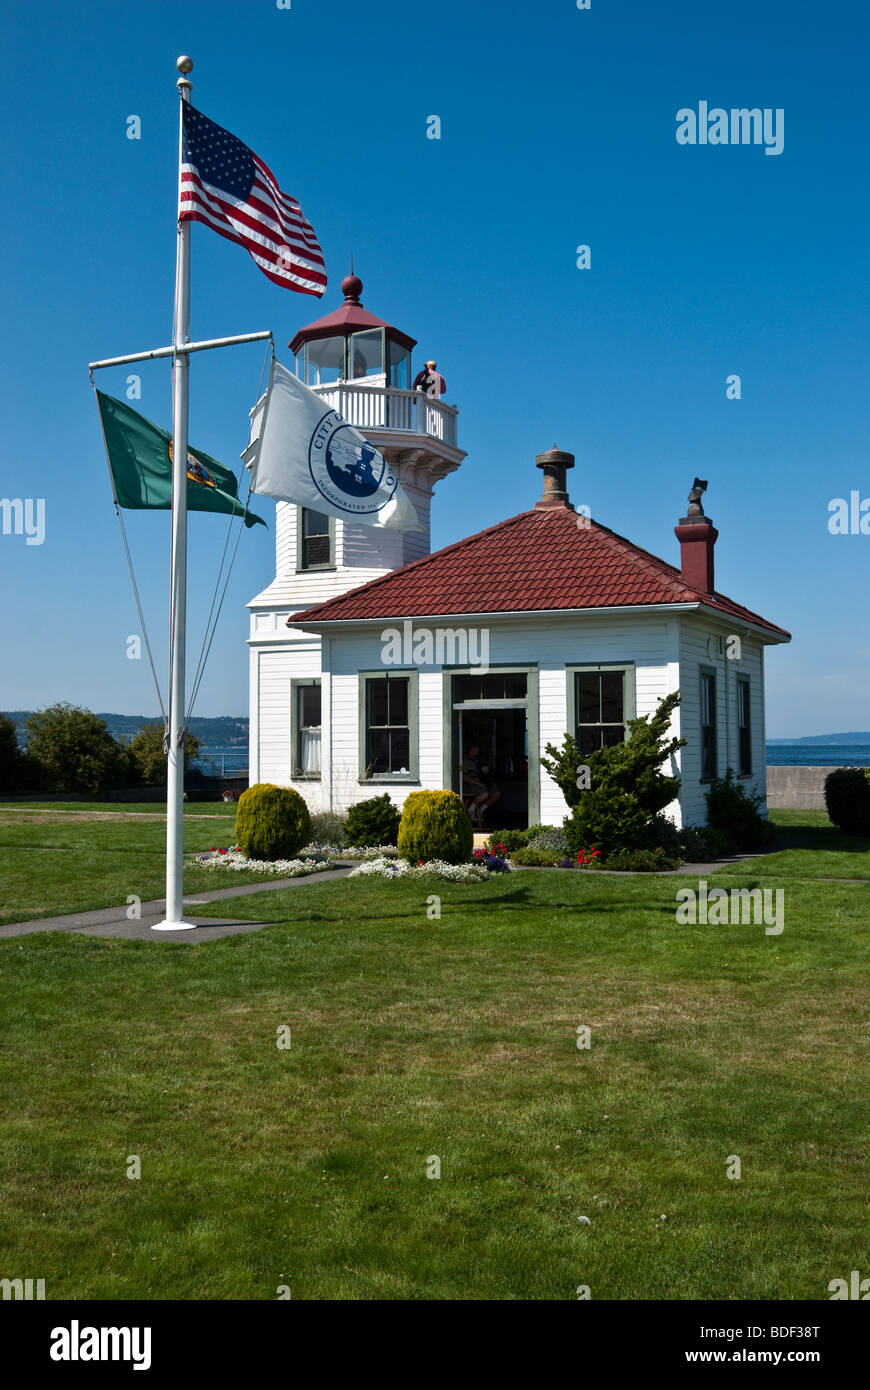 listed on the National Register of Historic Places the wooden Victorian style Mukilteo Lighthouse with flags flying Stock Photo